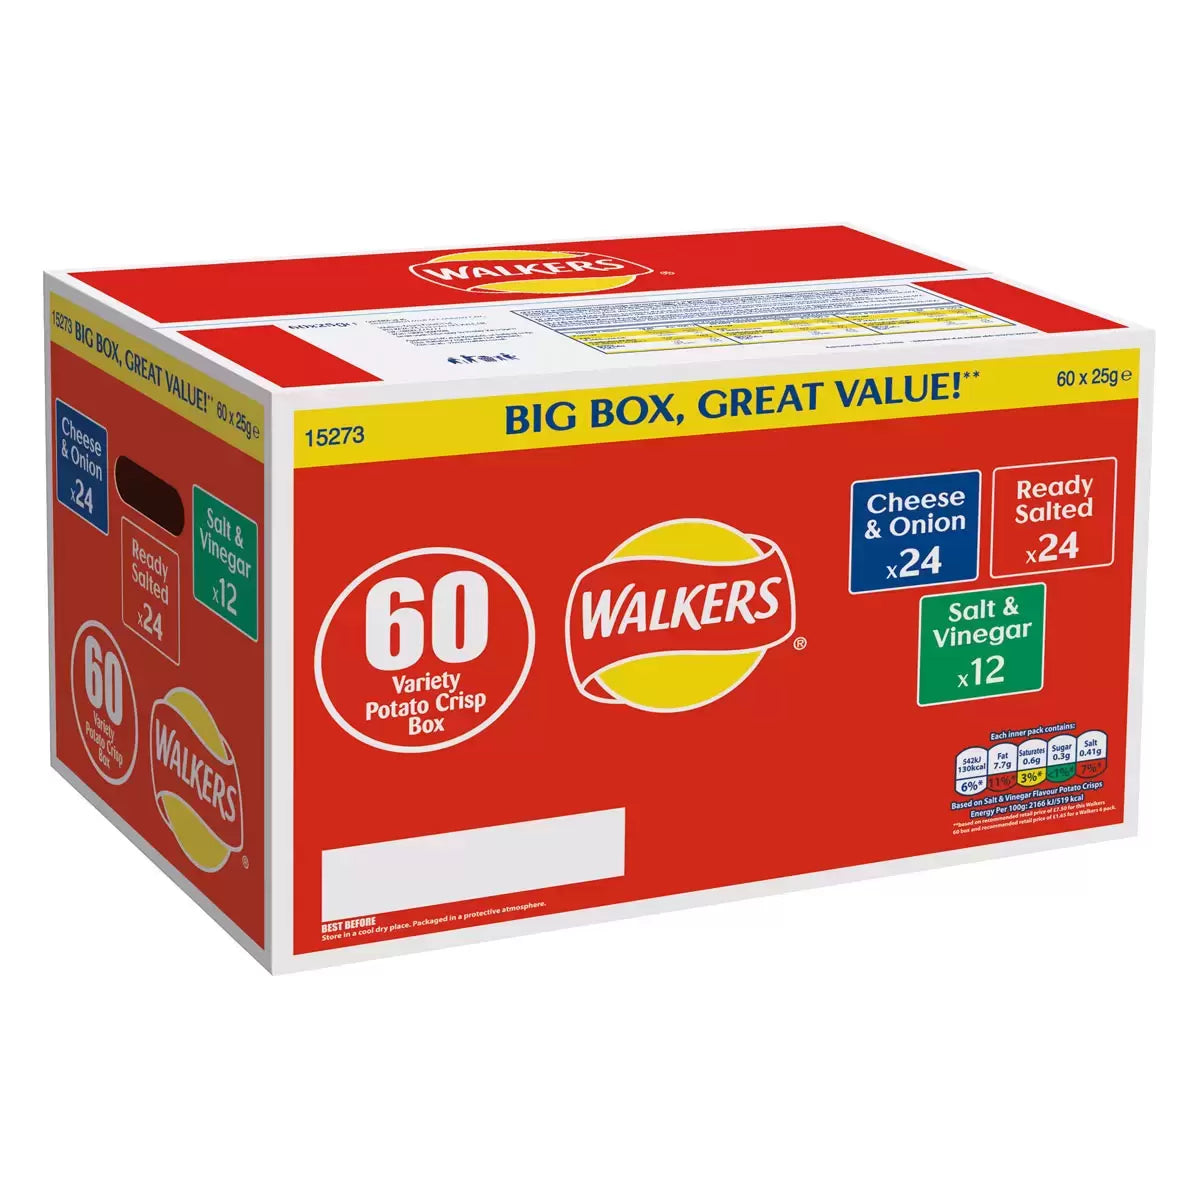 Walkers Crisps Variety Box 25g (Pack of 60)